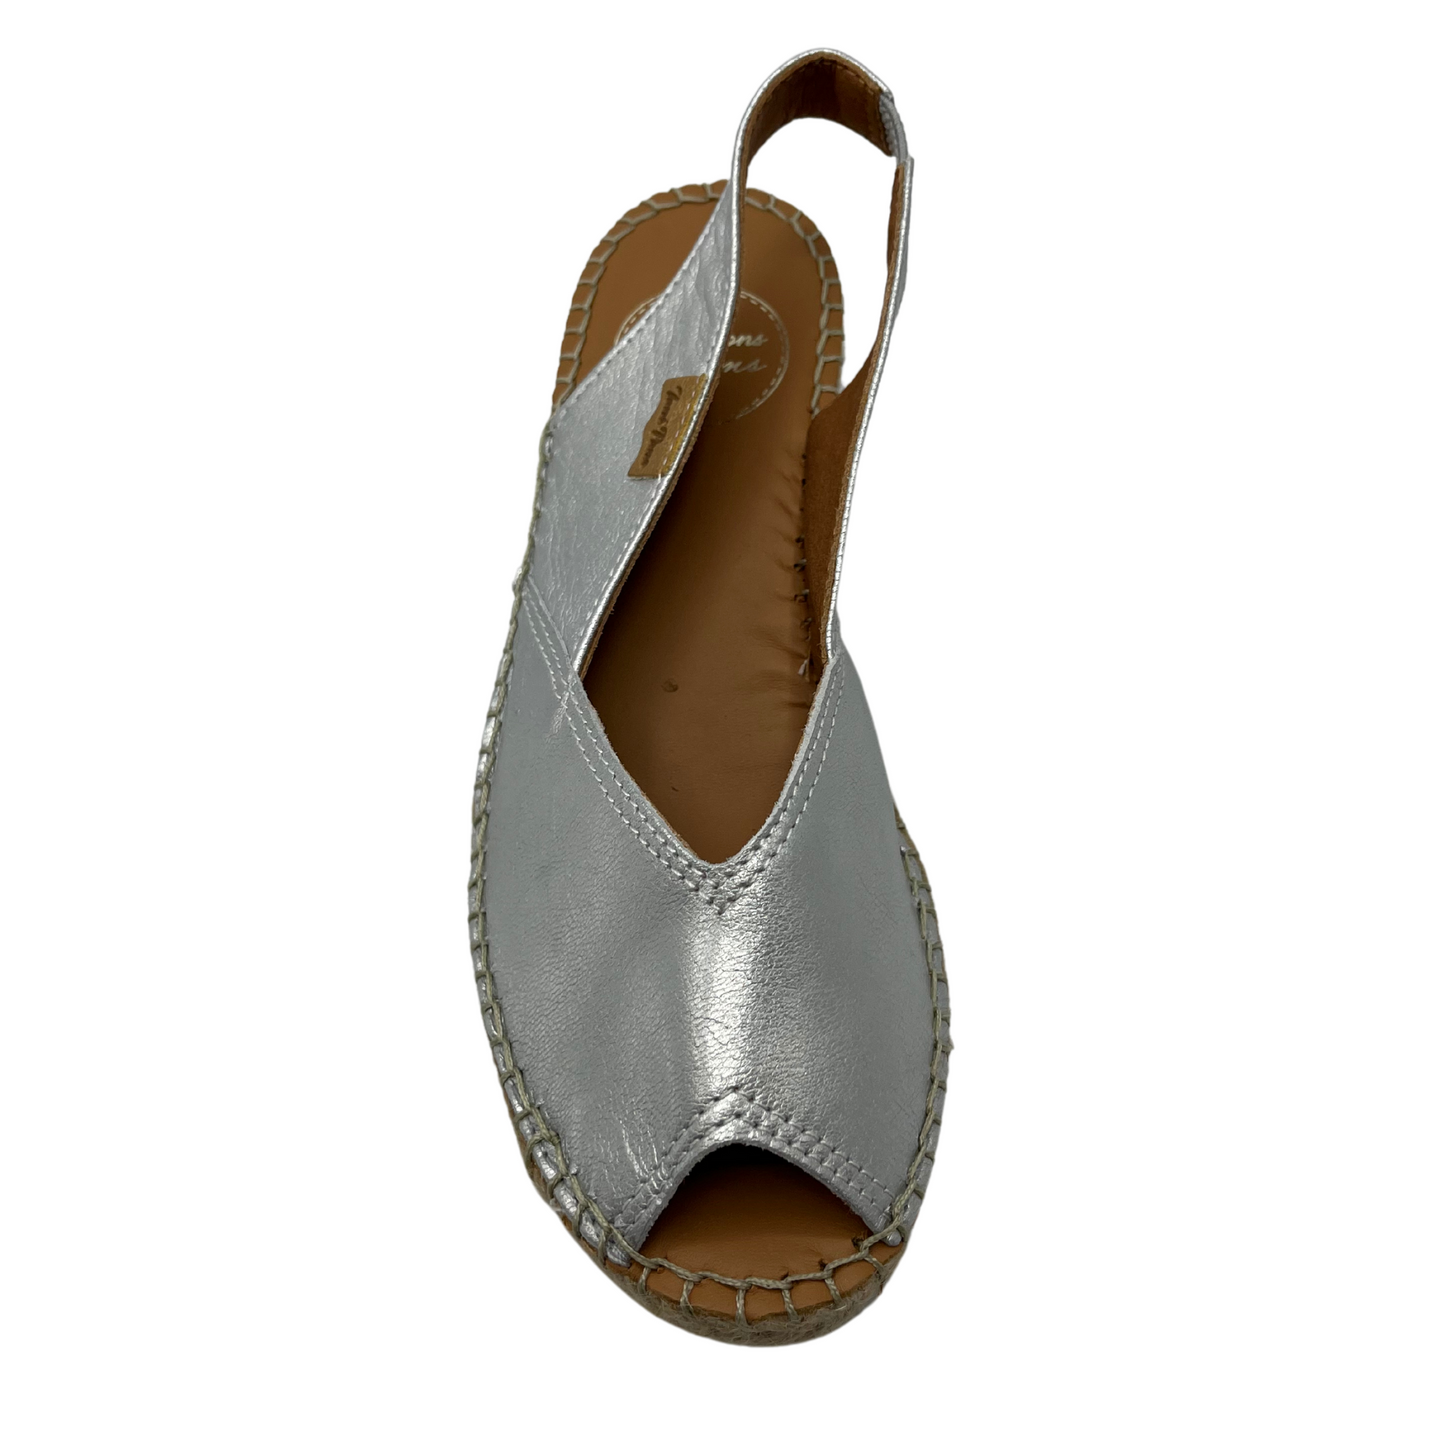 Top view of silver leather espadrille sandal with peep toe and slingback